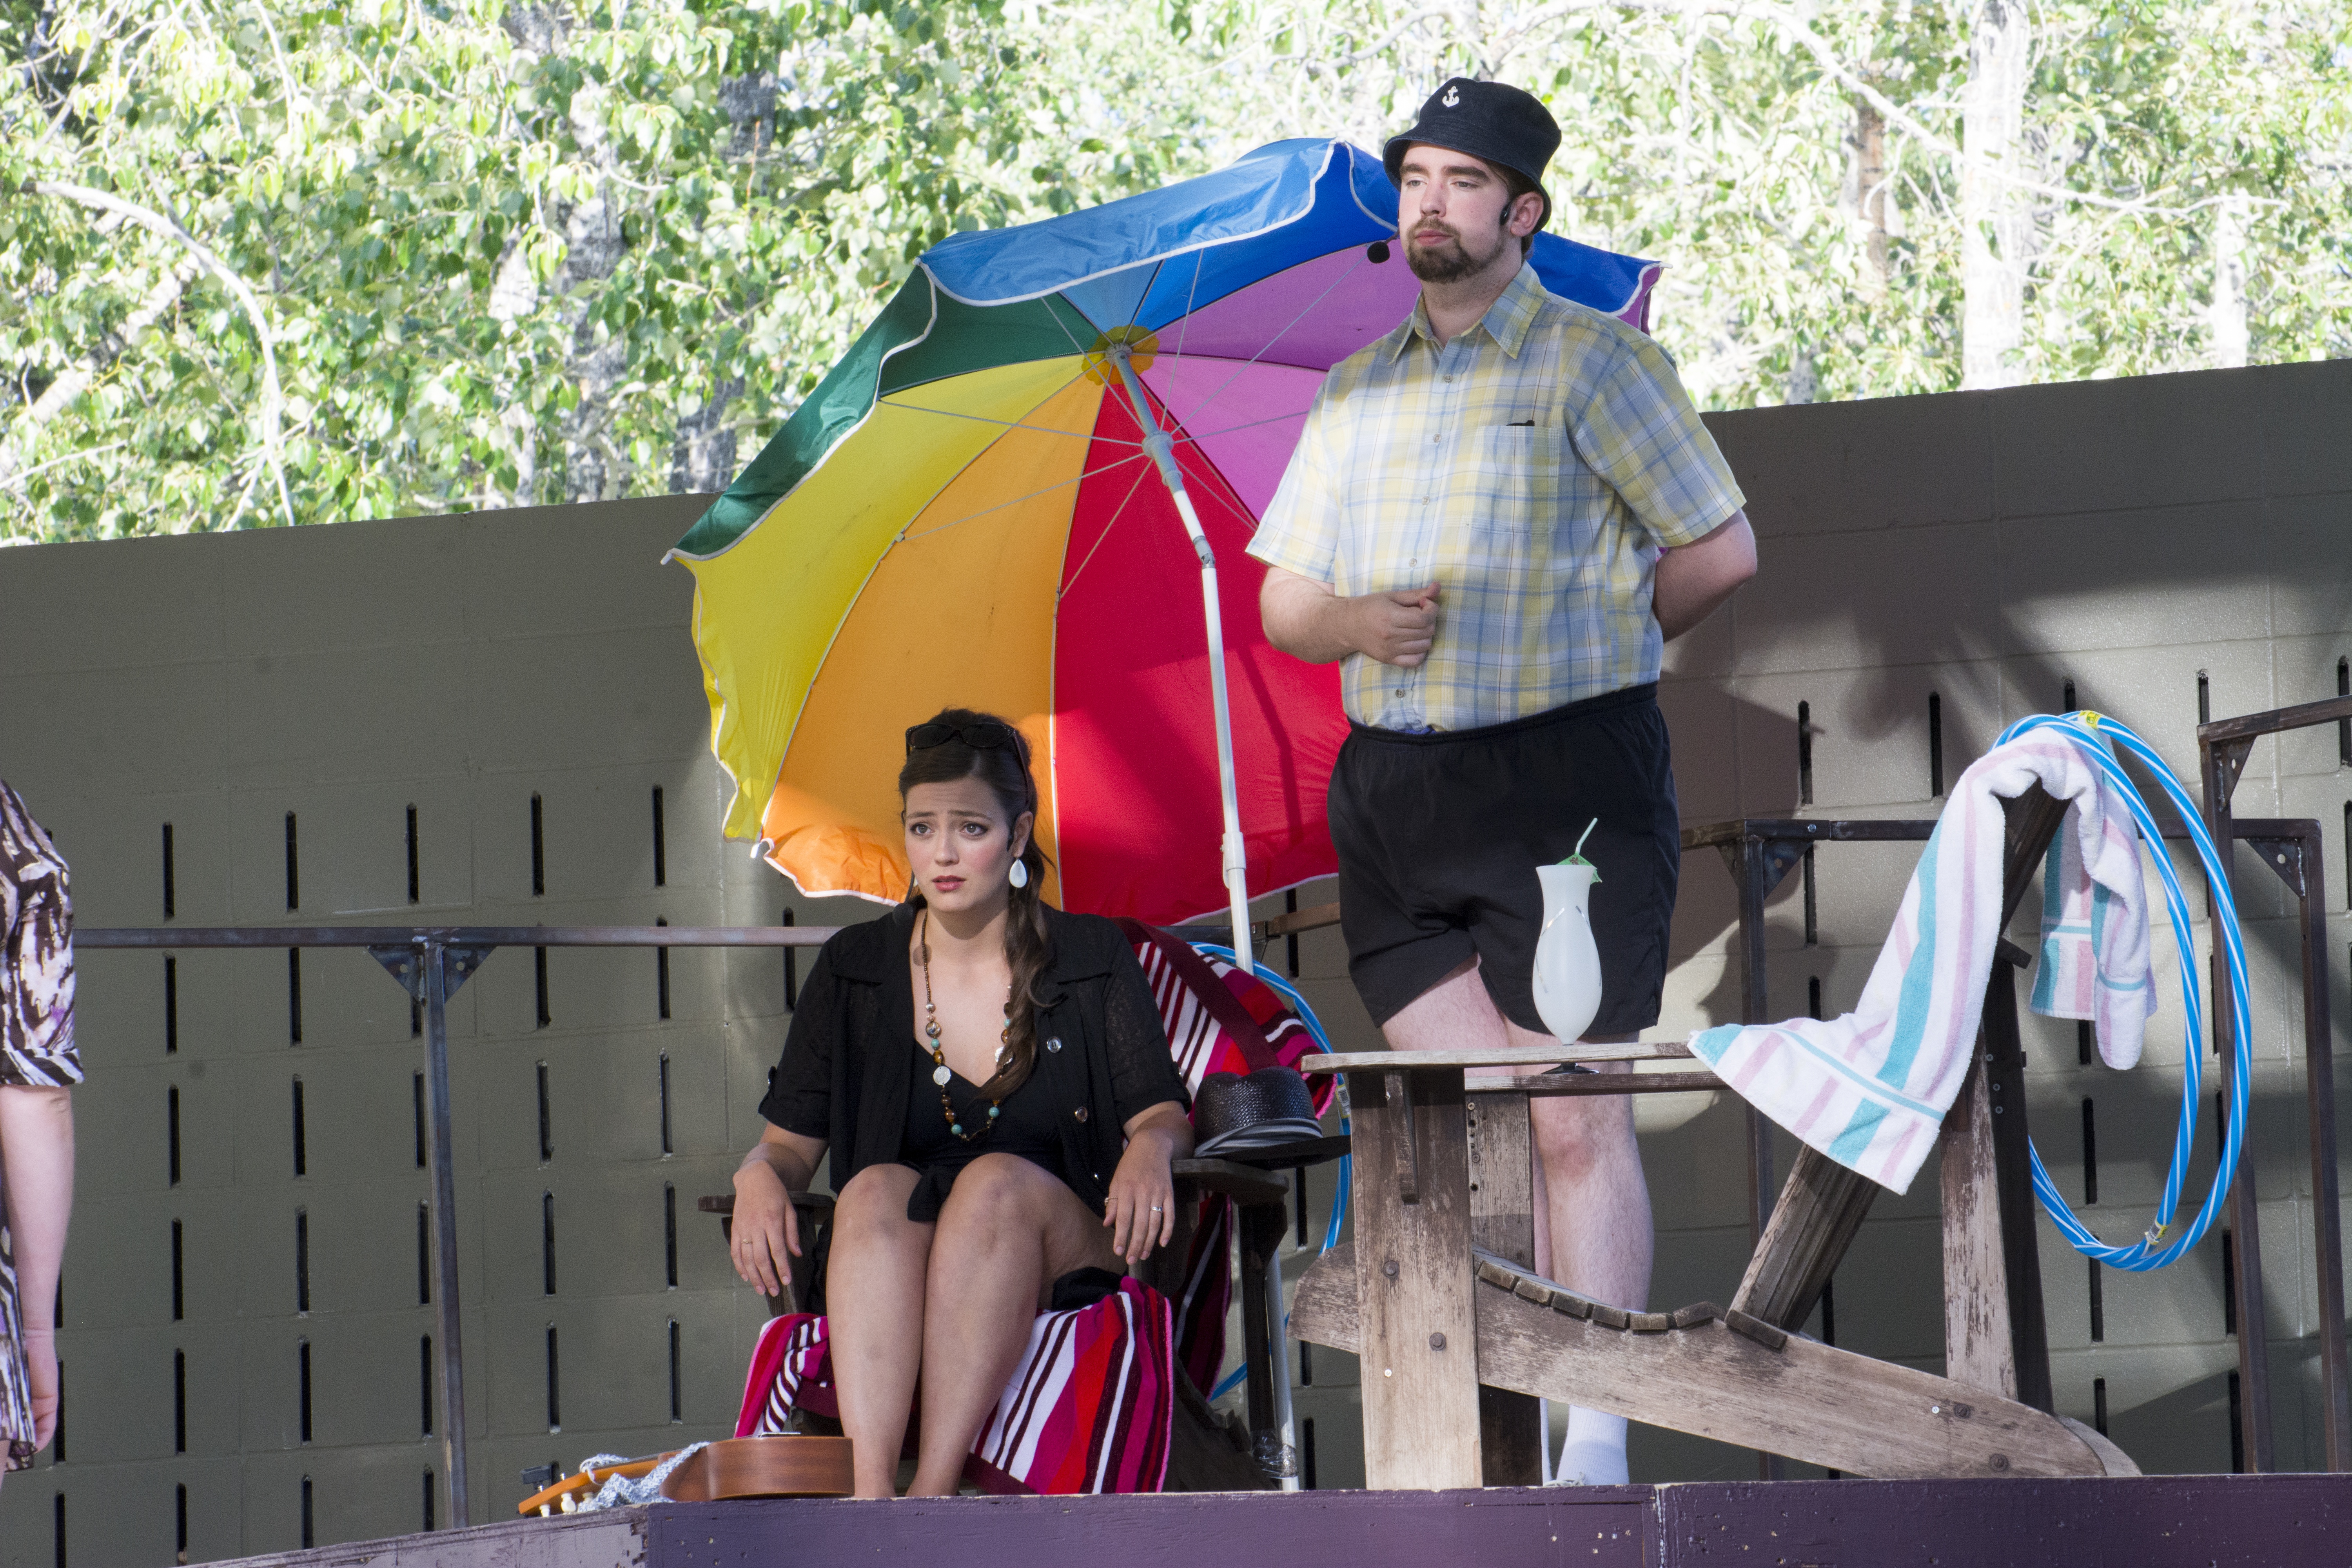 ENTERTAINMENT – Prime Stock Theatre’s production of Shakespeare’s Twelfth Night is currently staging at Bower Ponds as part of their annual Bard on Bower series.